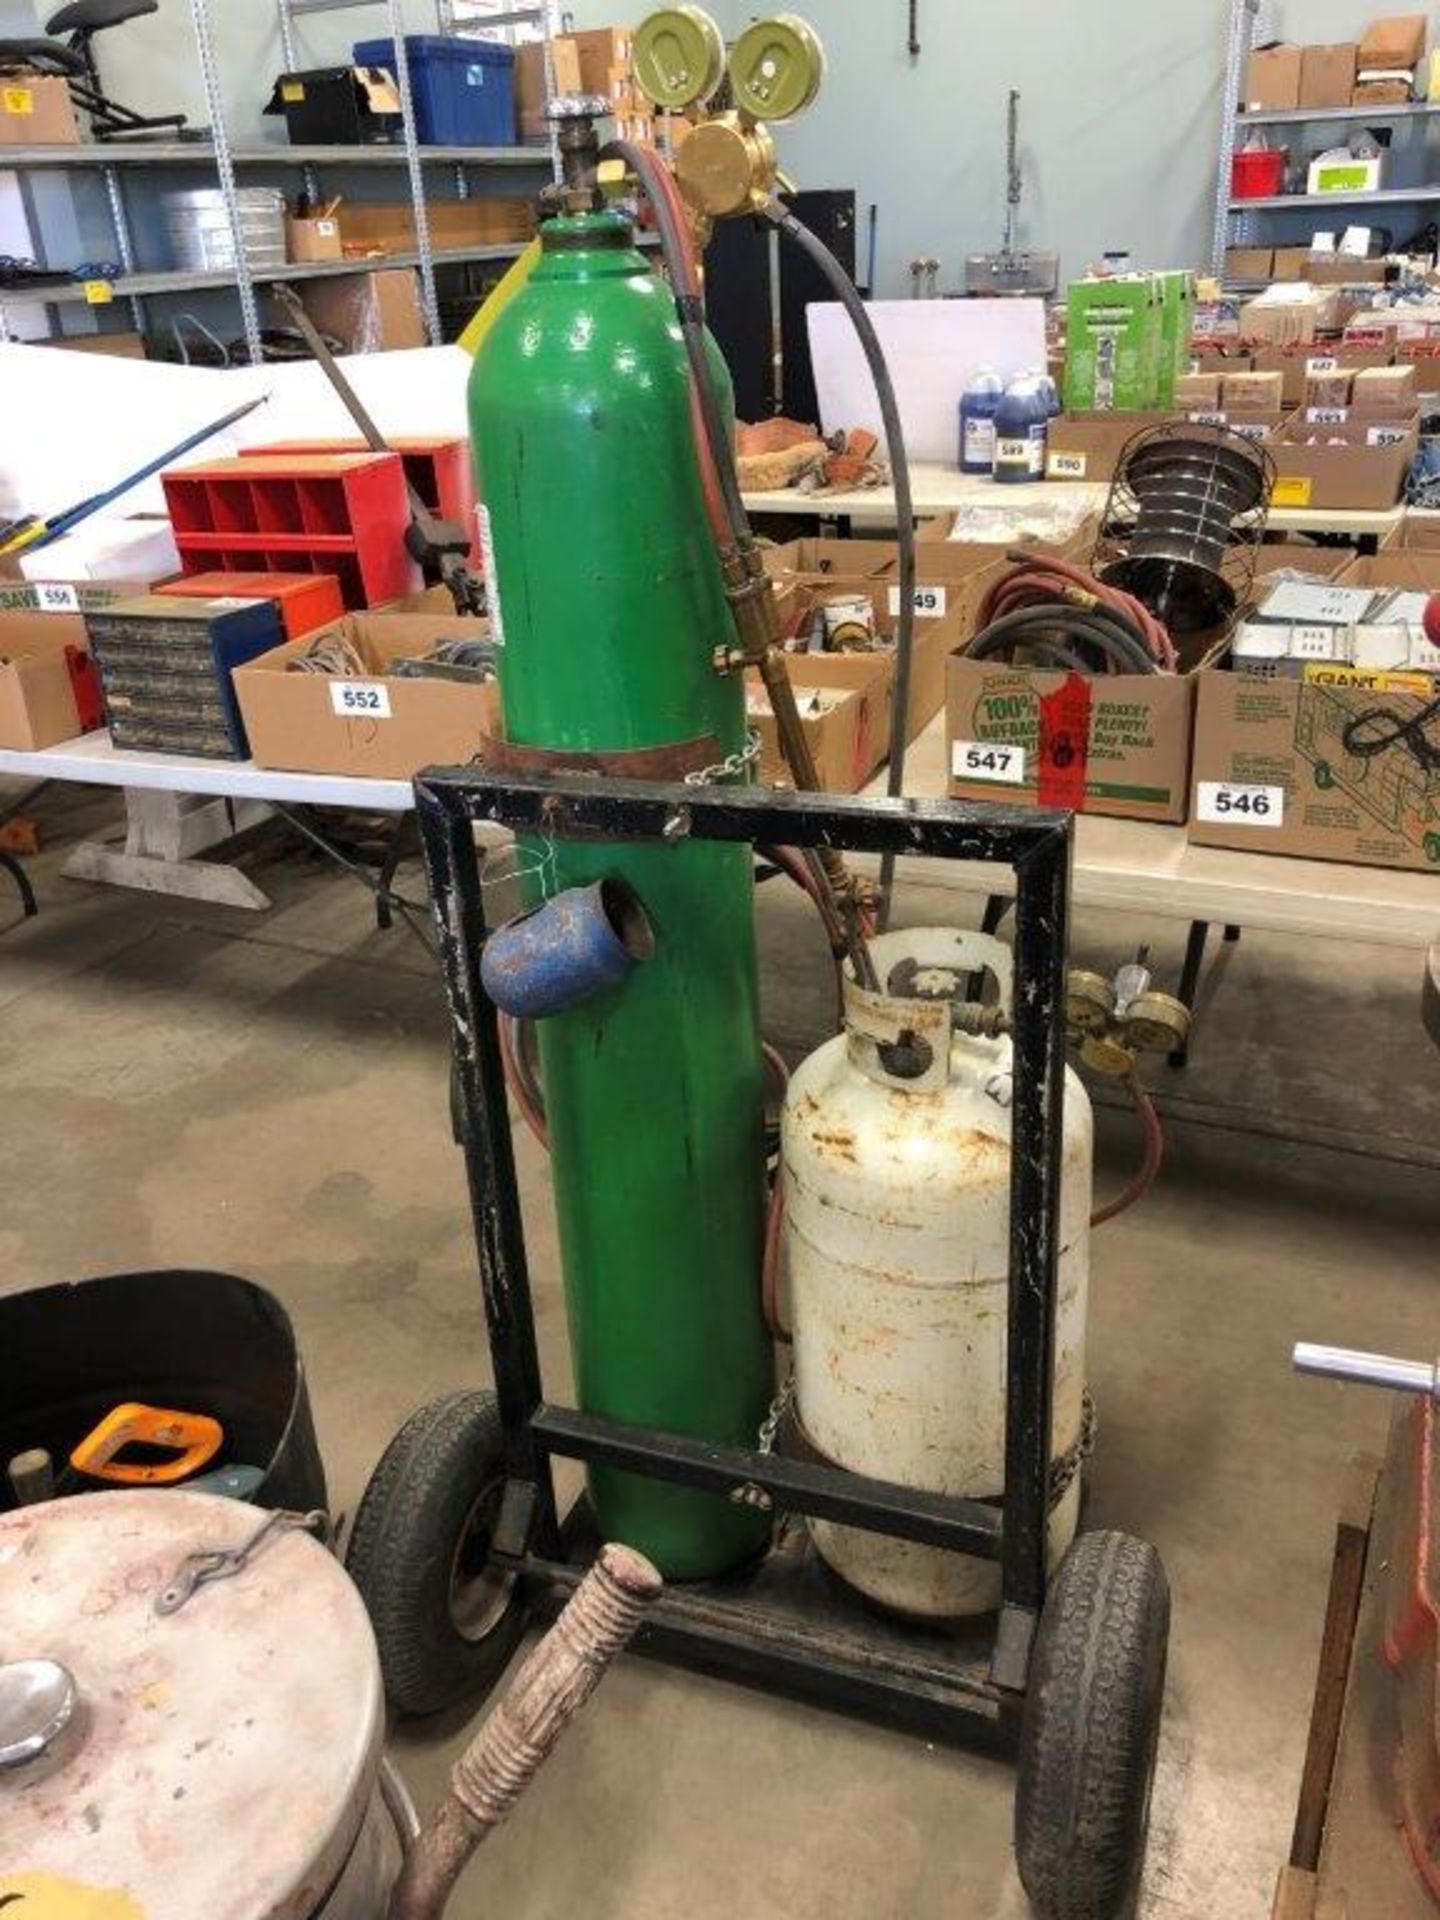 OXY/PROPANE CUTTING TORCH, TANKS, HOSES, ETC. CUSTOMER-OWNED BOTTLES - 43 - Image 4 of 4